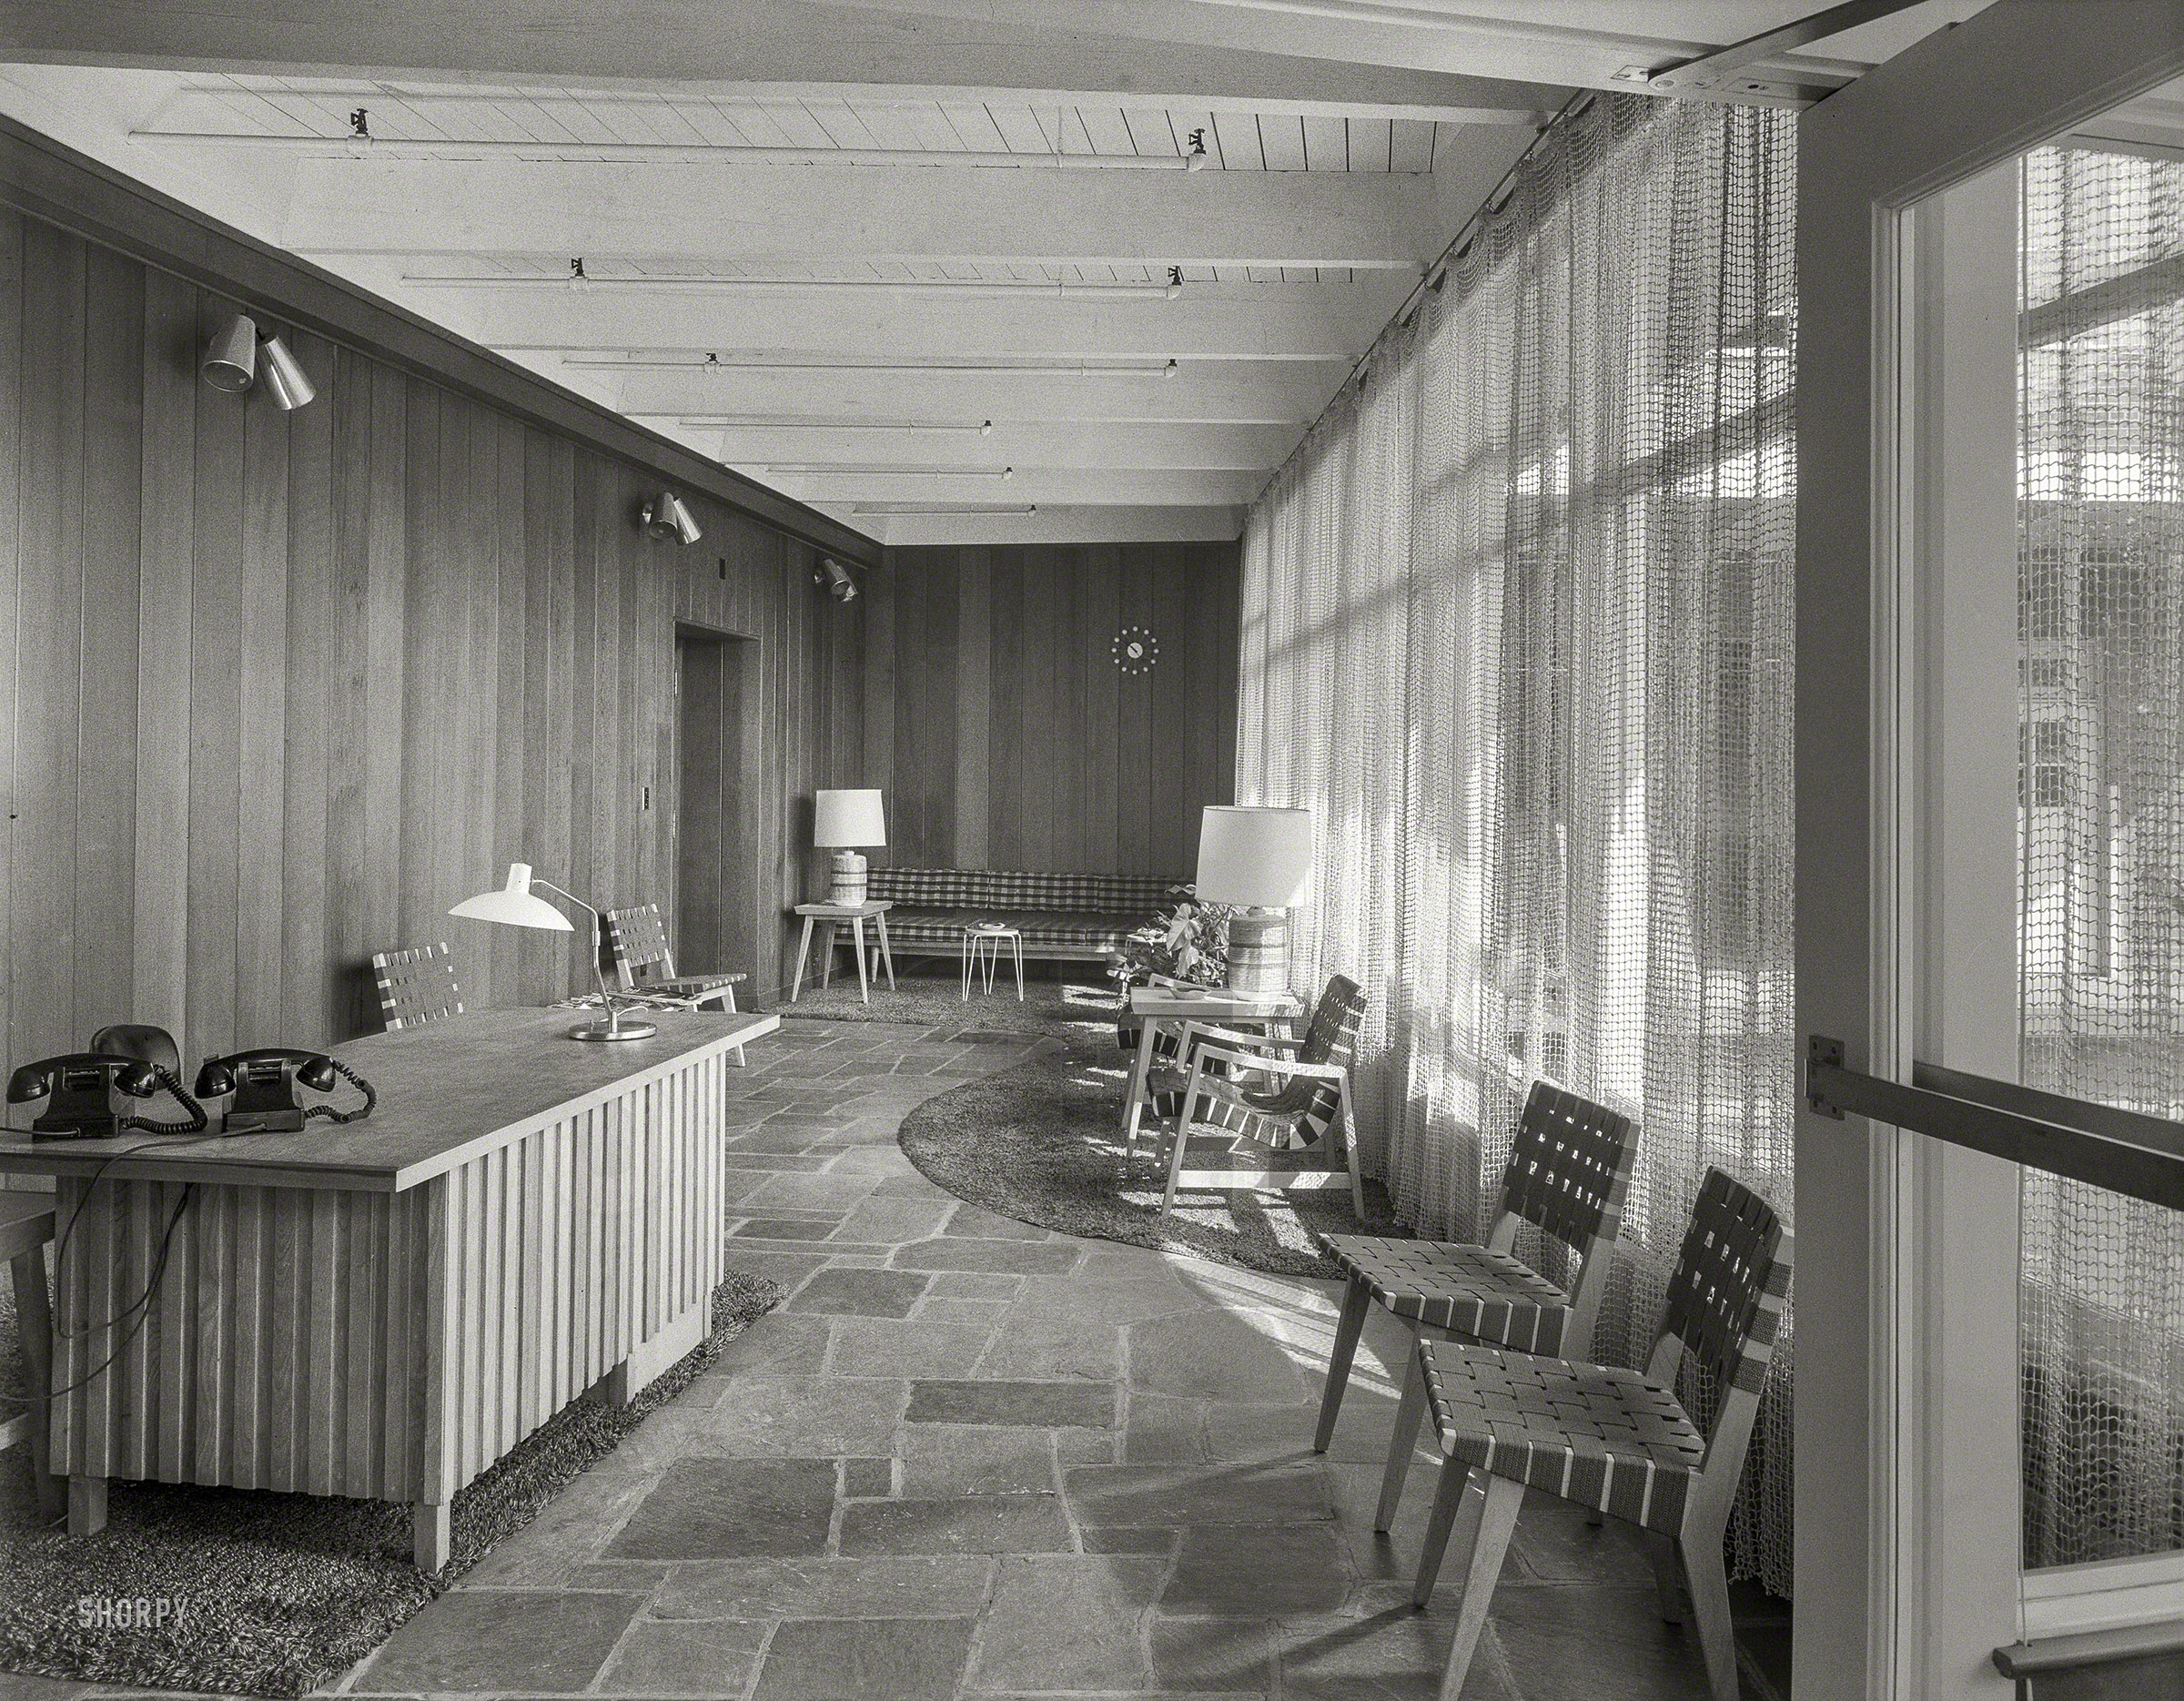 Oct. 12, 1953. "Becton Dickinson, East Rutherford, New Jersey. Reception room to entrance. Fellheimer & Wagner, architect." All this patio needs now is a charcoal grill. Large-format acetate negative by Gottscho-Schleisner. View full size.